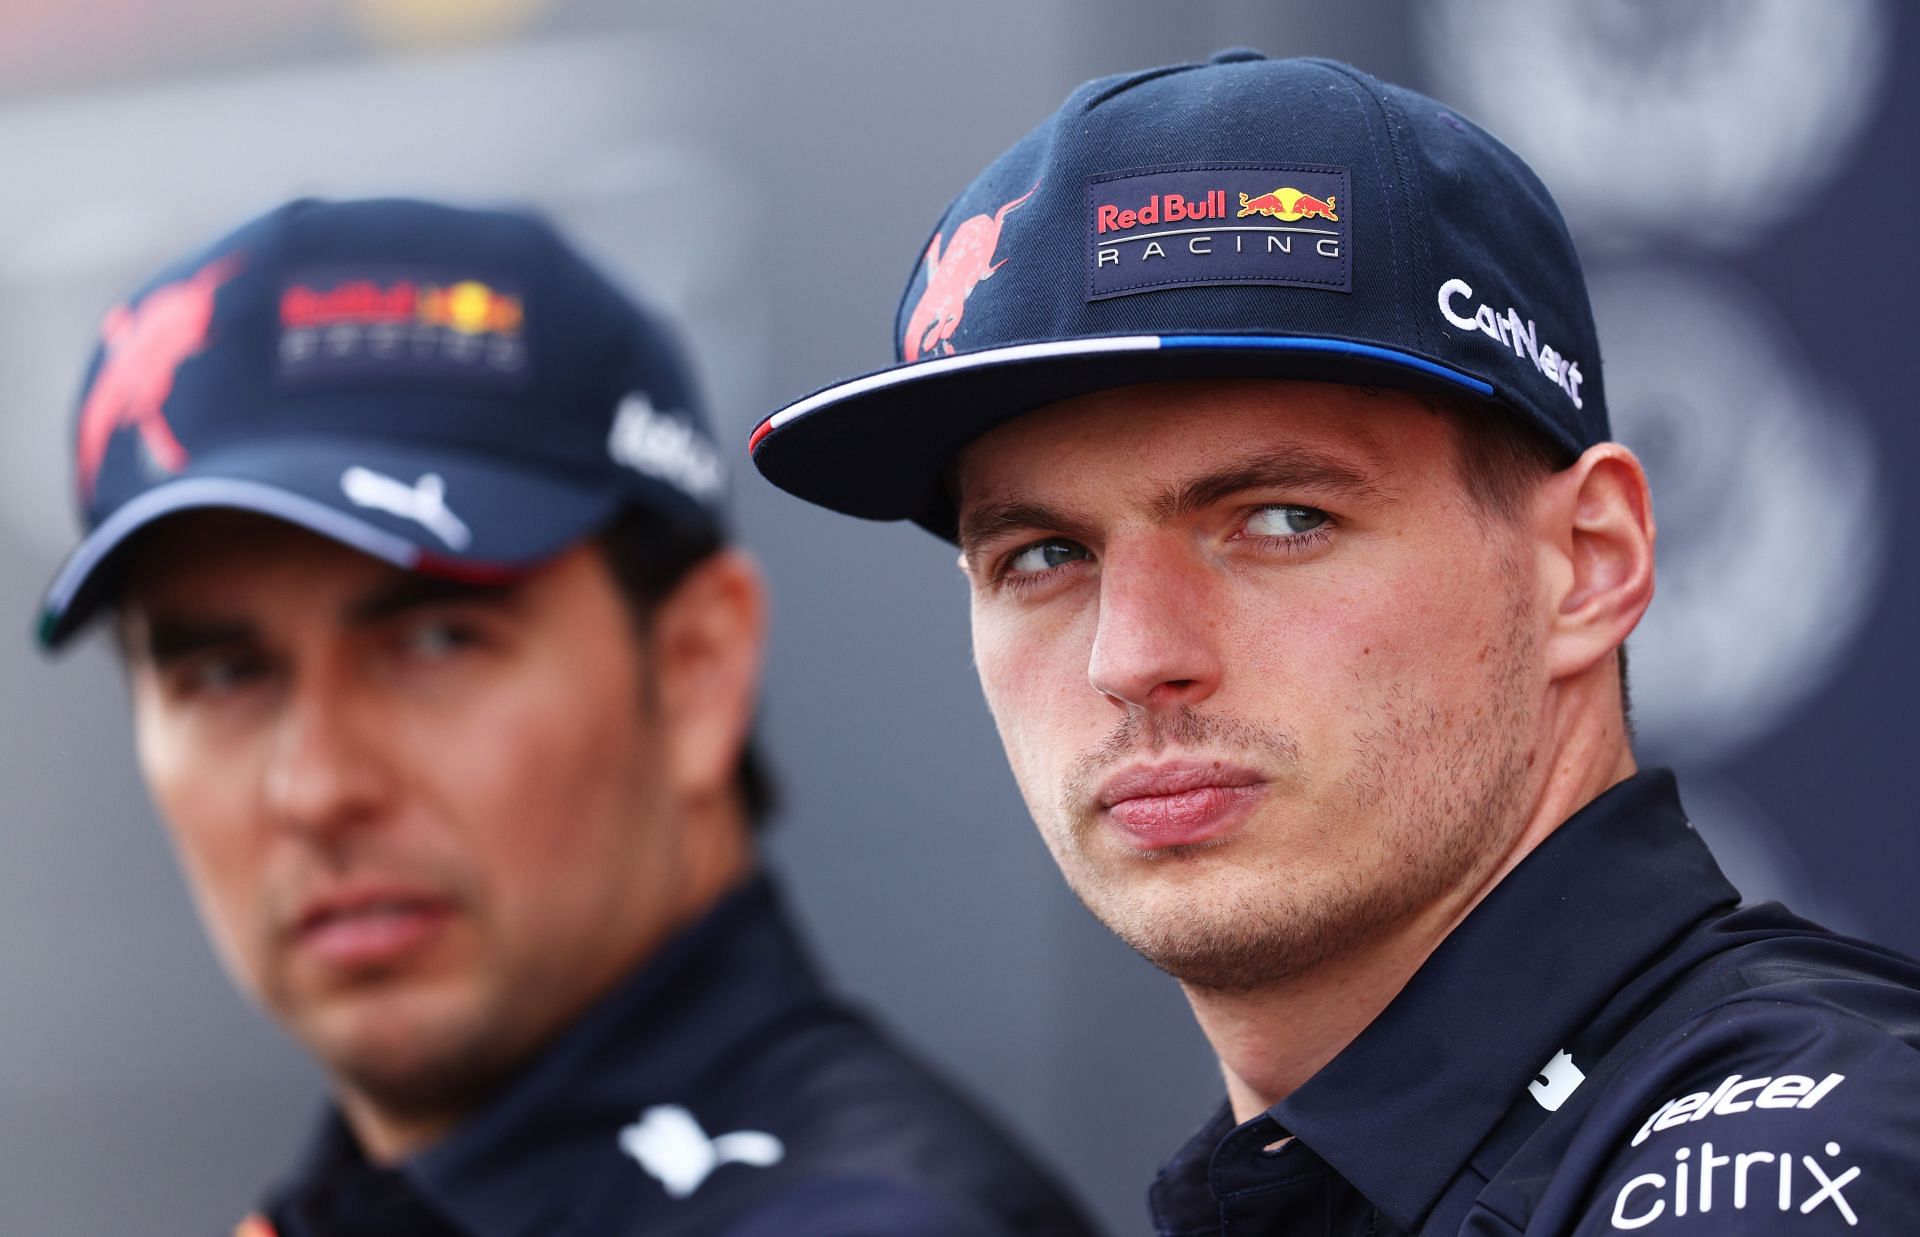 Red Bull drivers Sergio Perez (left) and Max Verstappen (right) at the 2022 F1 Grand Prix of Canada